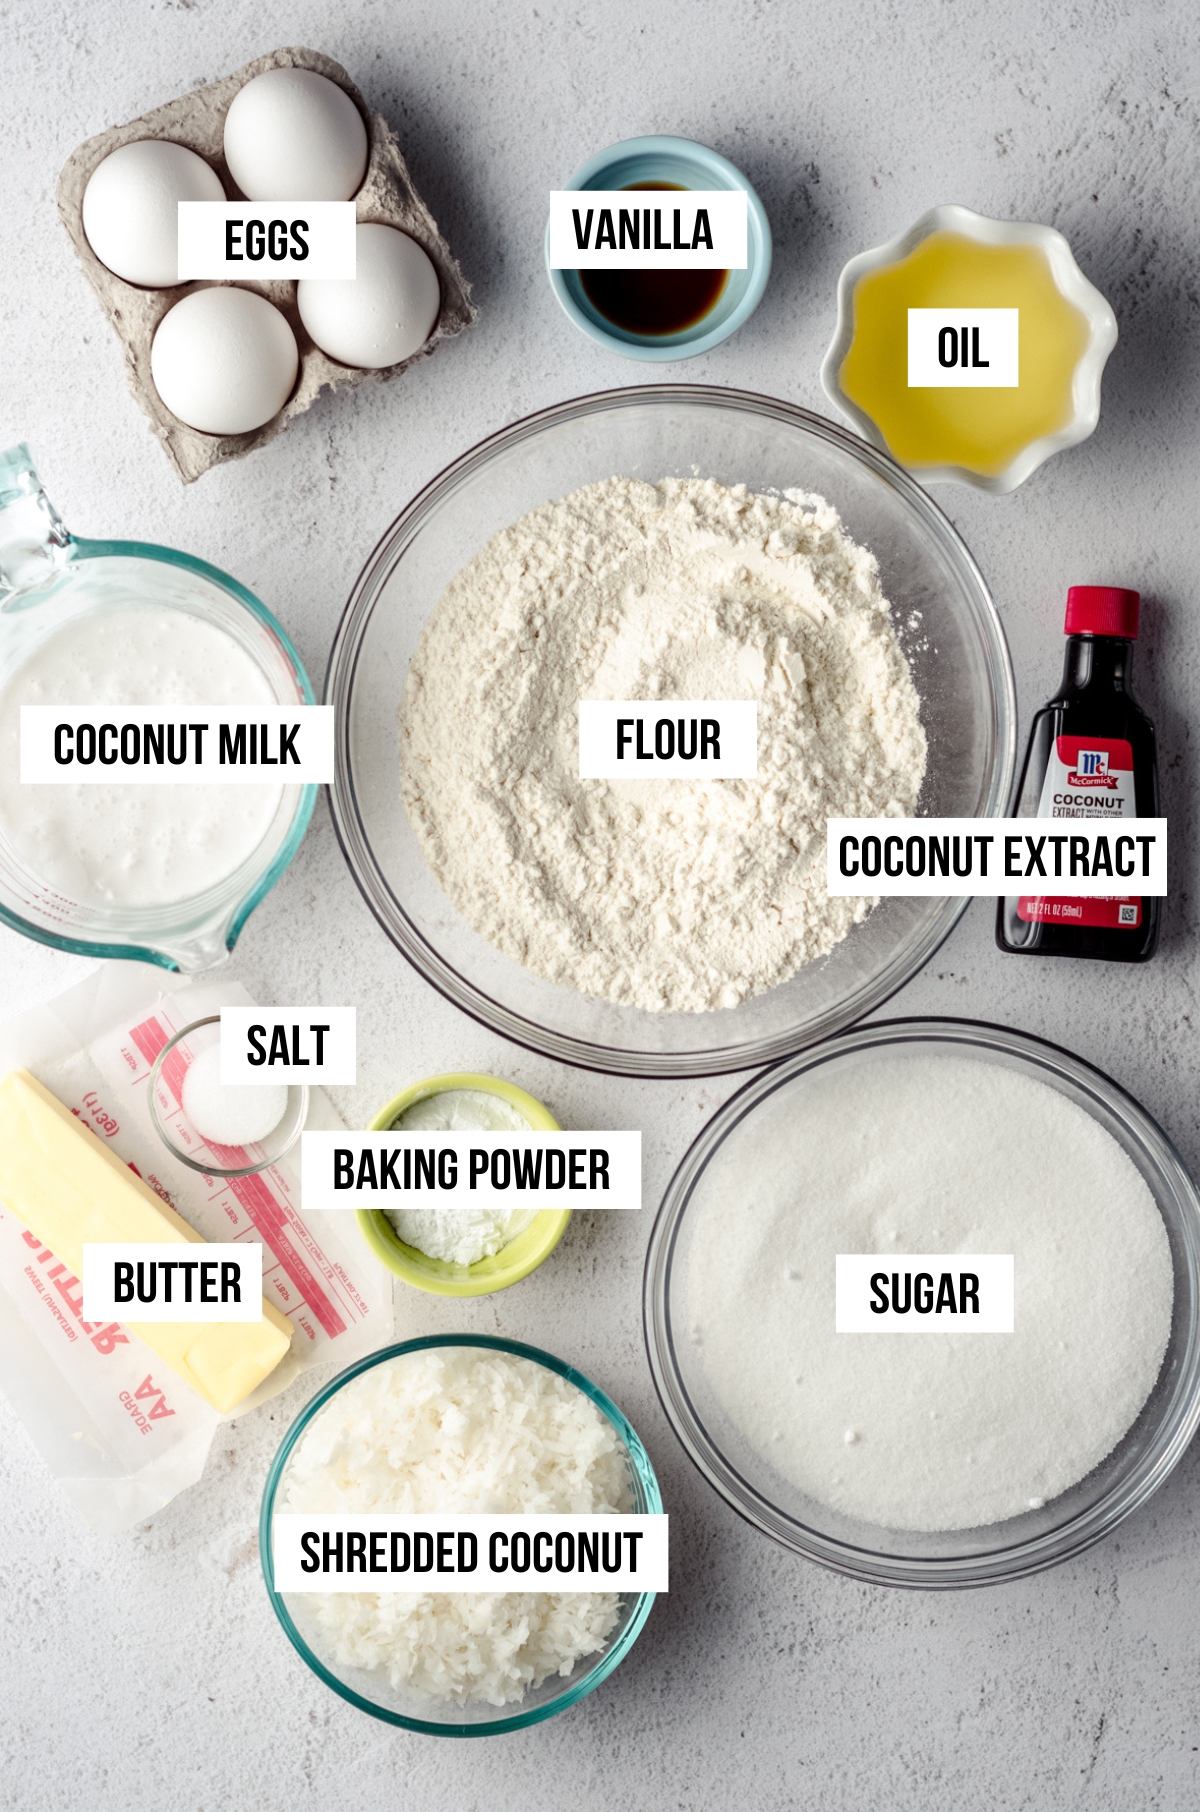 ingredients needed for coconut bundt cake laid out on a counter.